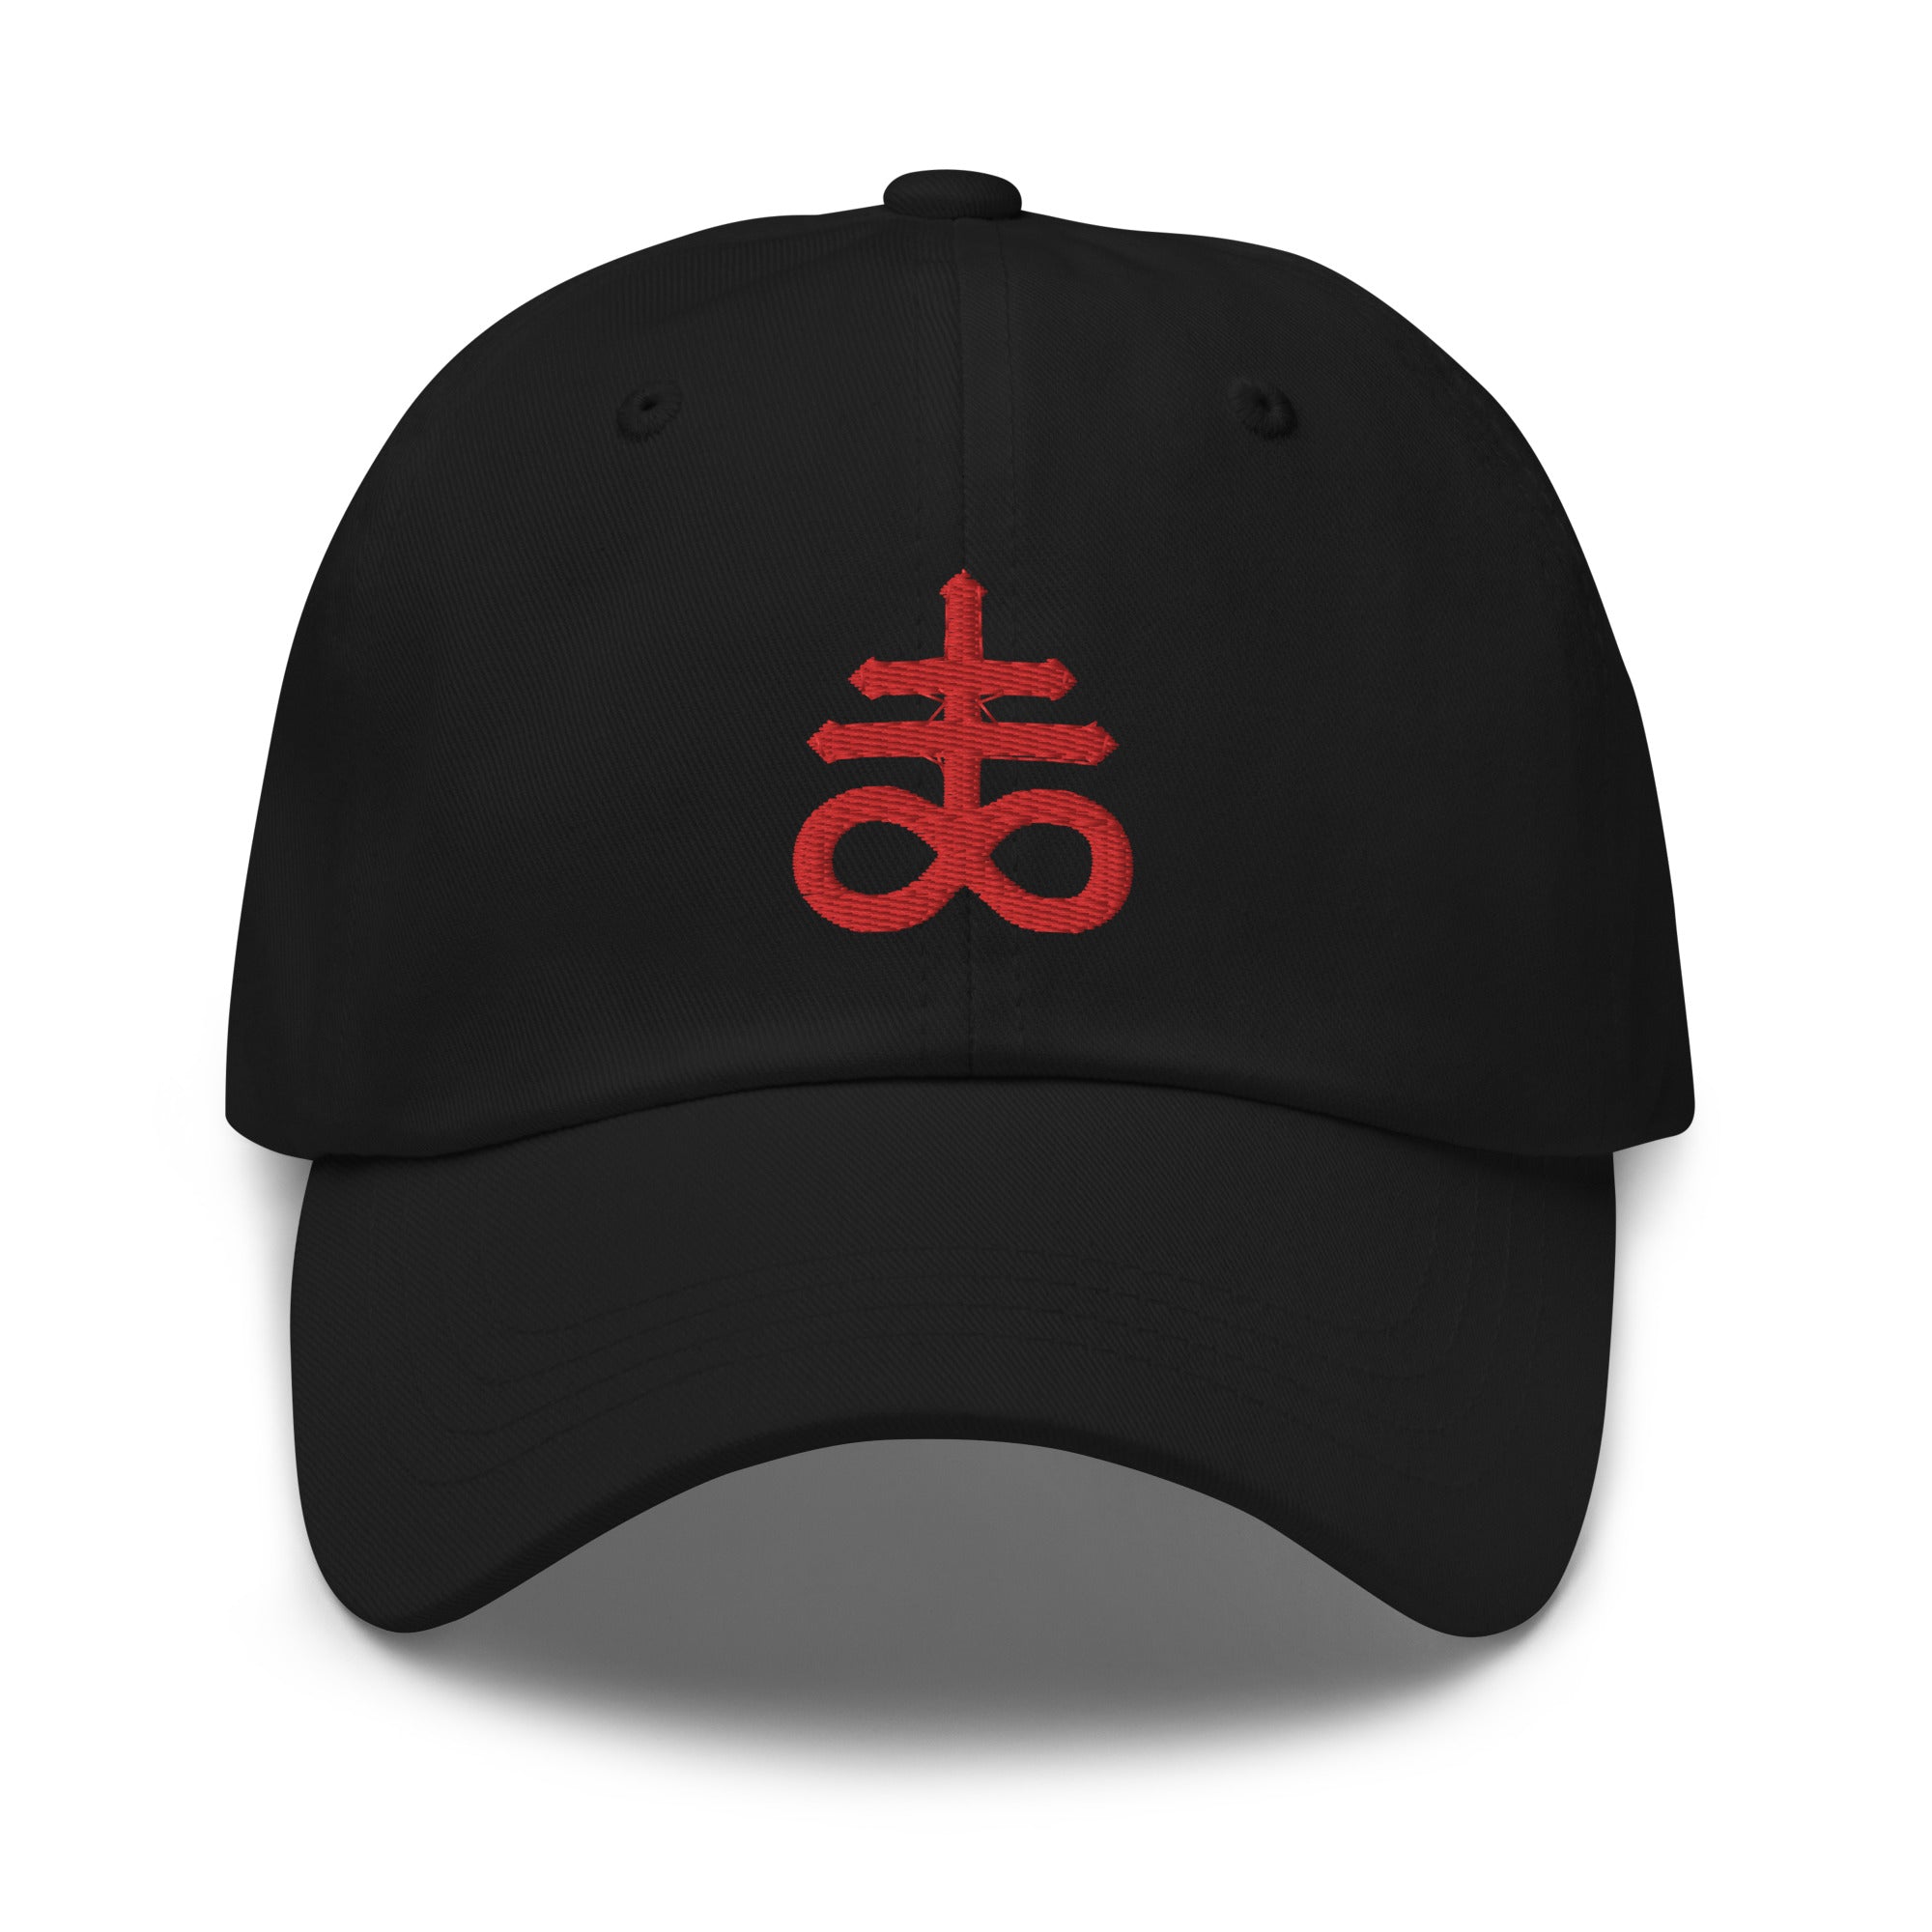 Red The Leviathan Cross of Satan Occult Symbol Embroidered Baseball Cap Dad hat Black Sulfur - Edge of Life Designs